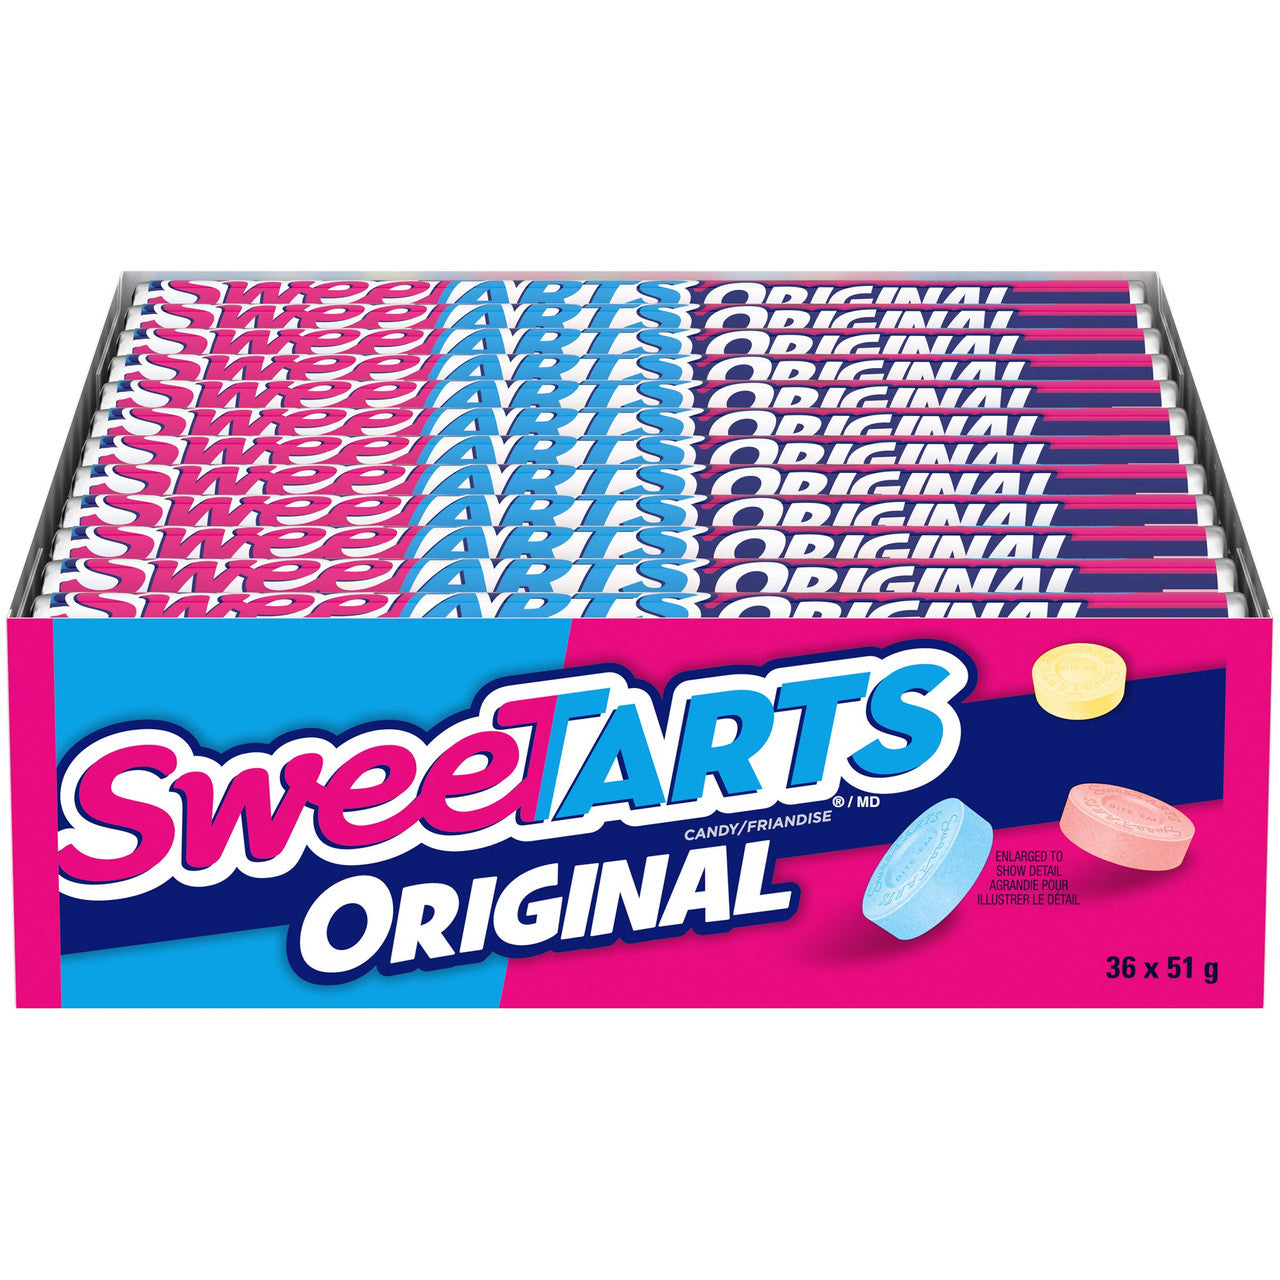 SweeTARTS Original Candy, 1.8oz. Roll (Pack of 36)  {Imported from Canada}